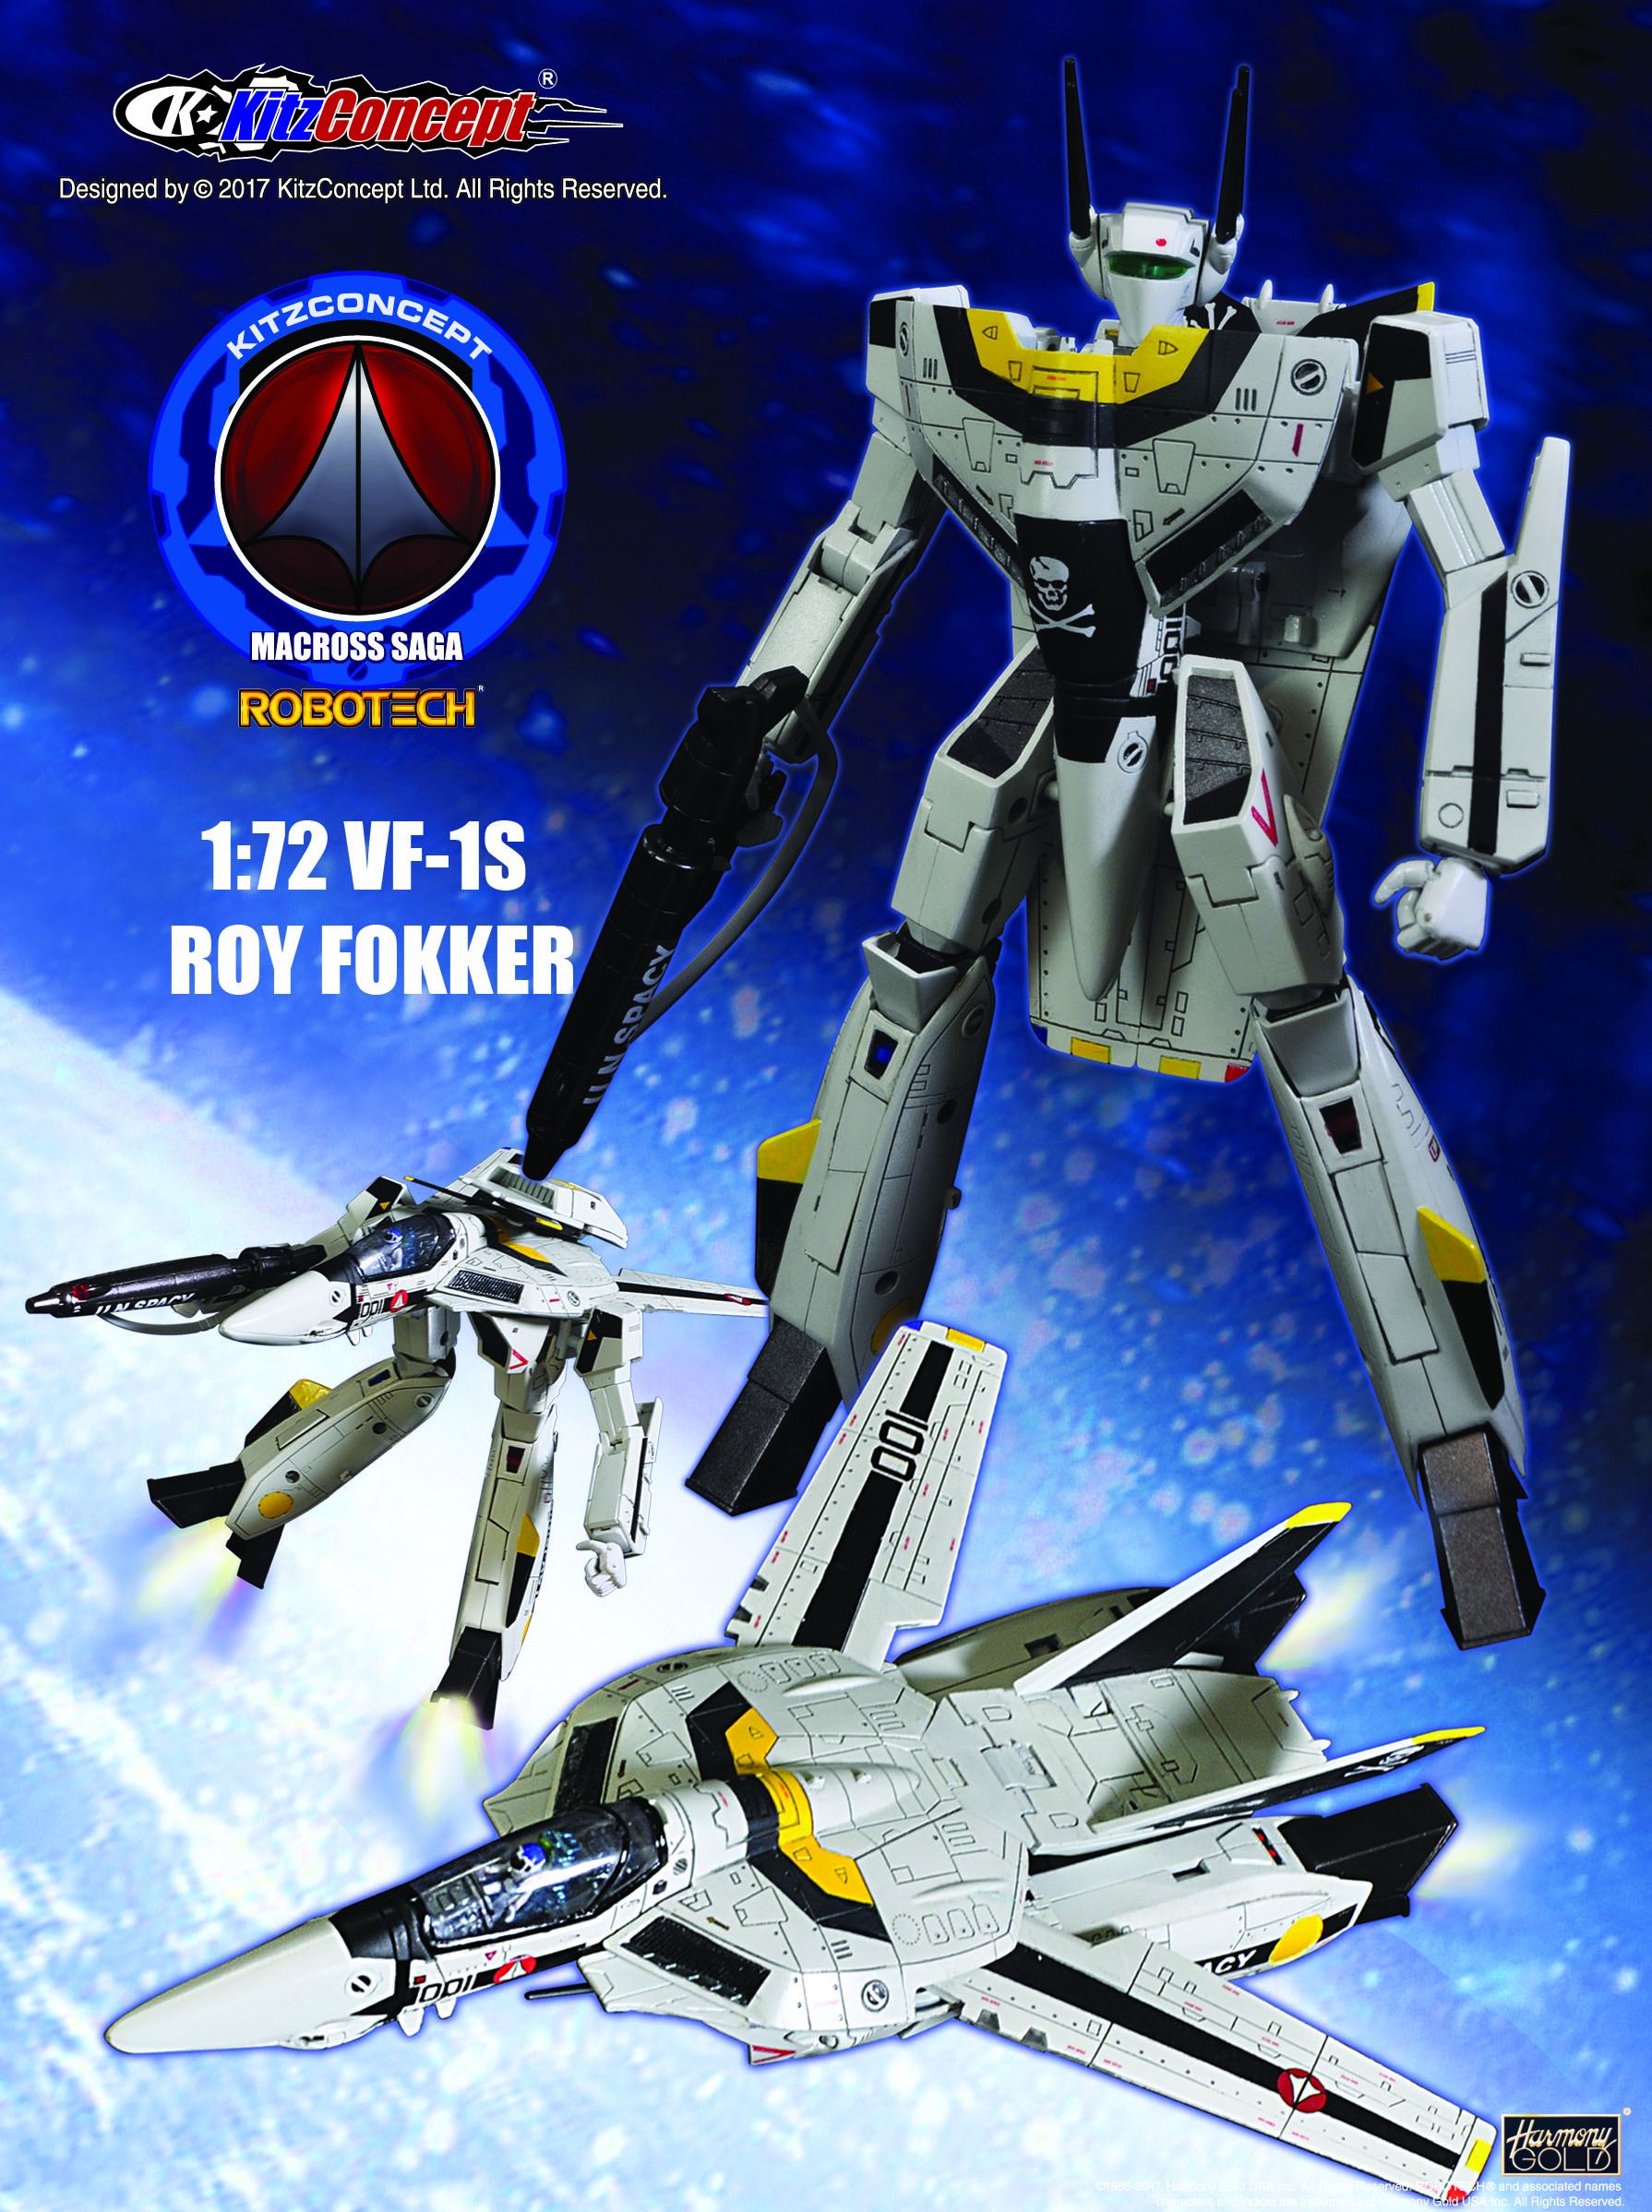 ROBOTECH 1/72 SCALE ACTION FIGURE: VF-1S ROY FOKKER by KitzConcept